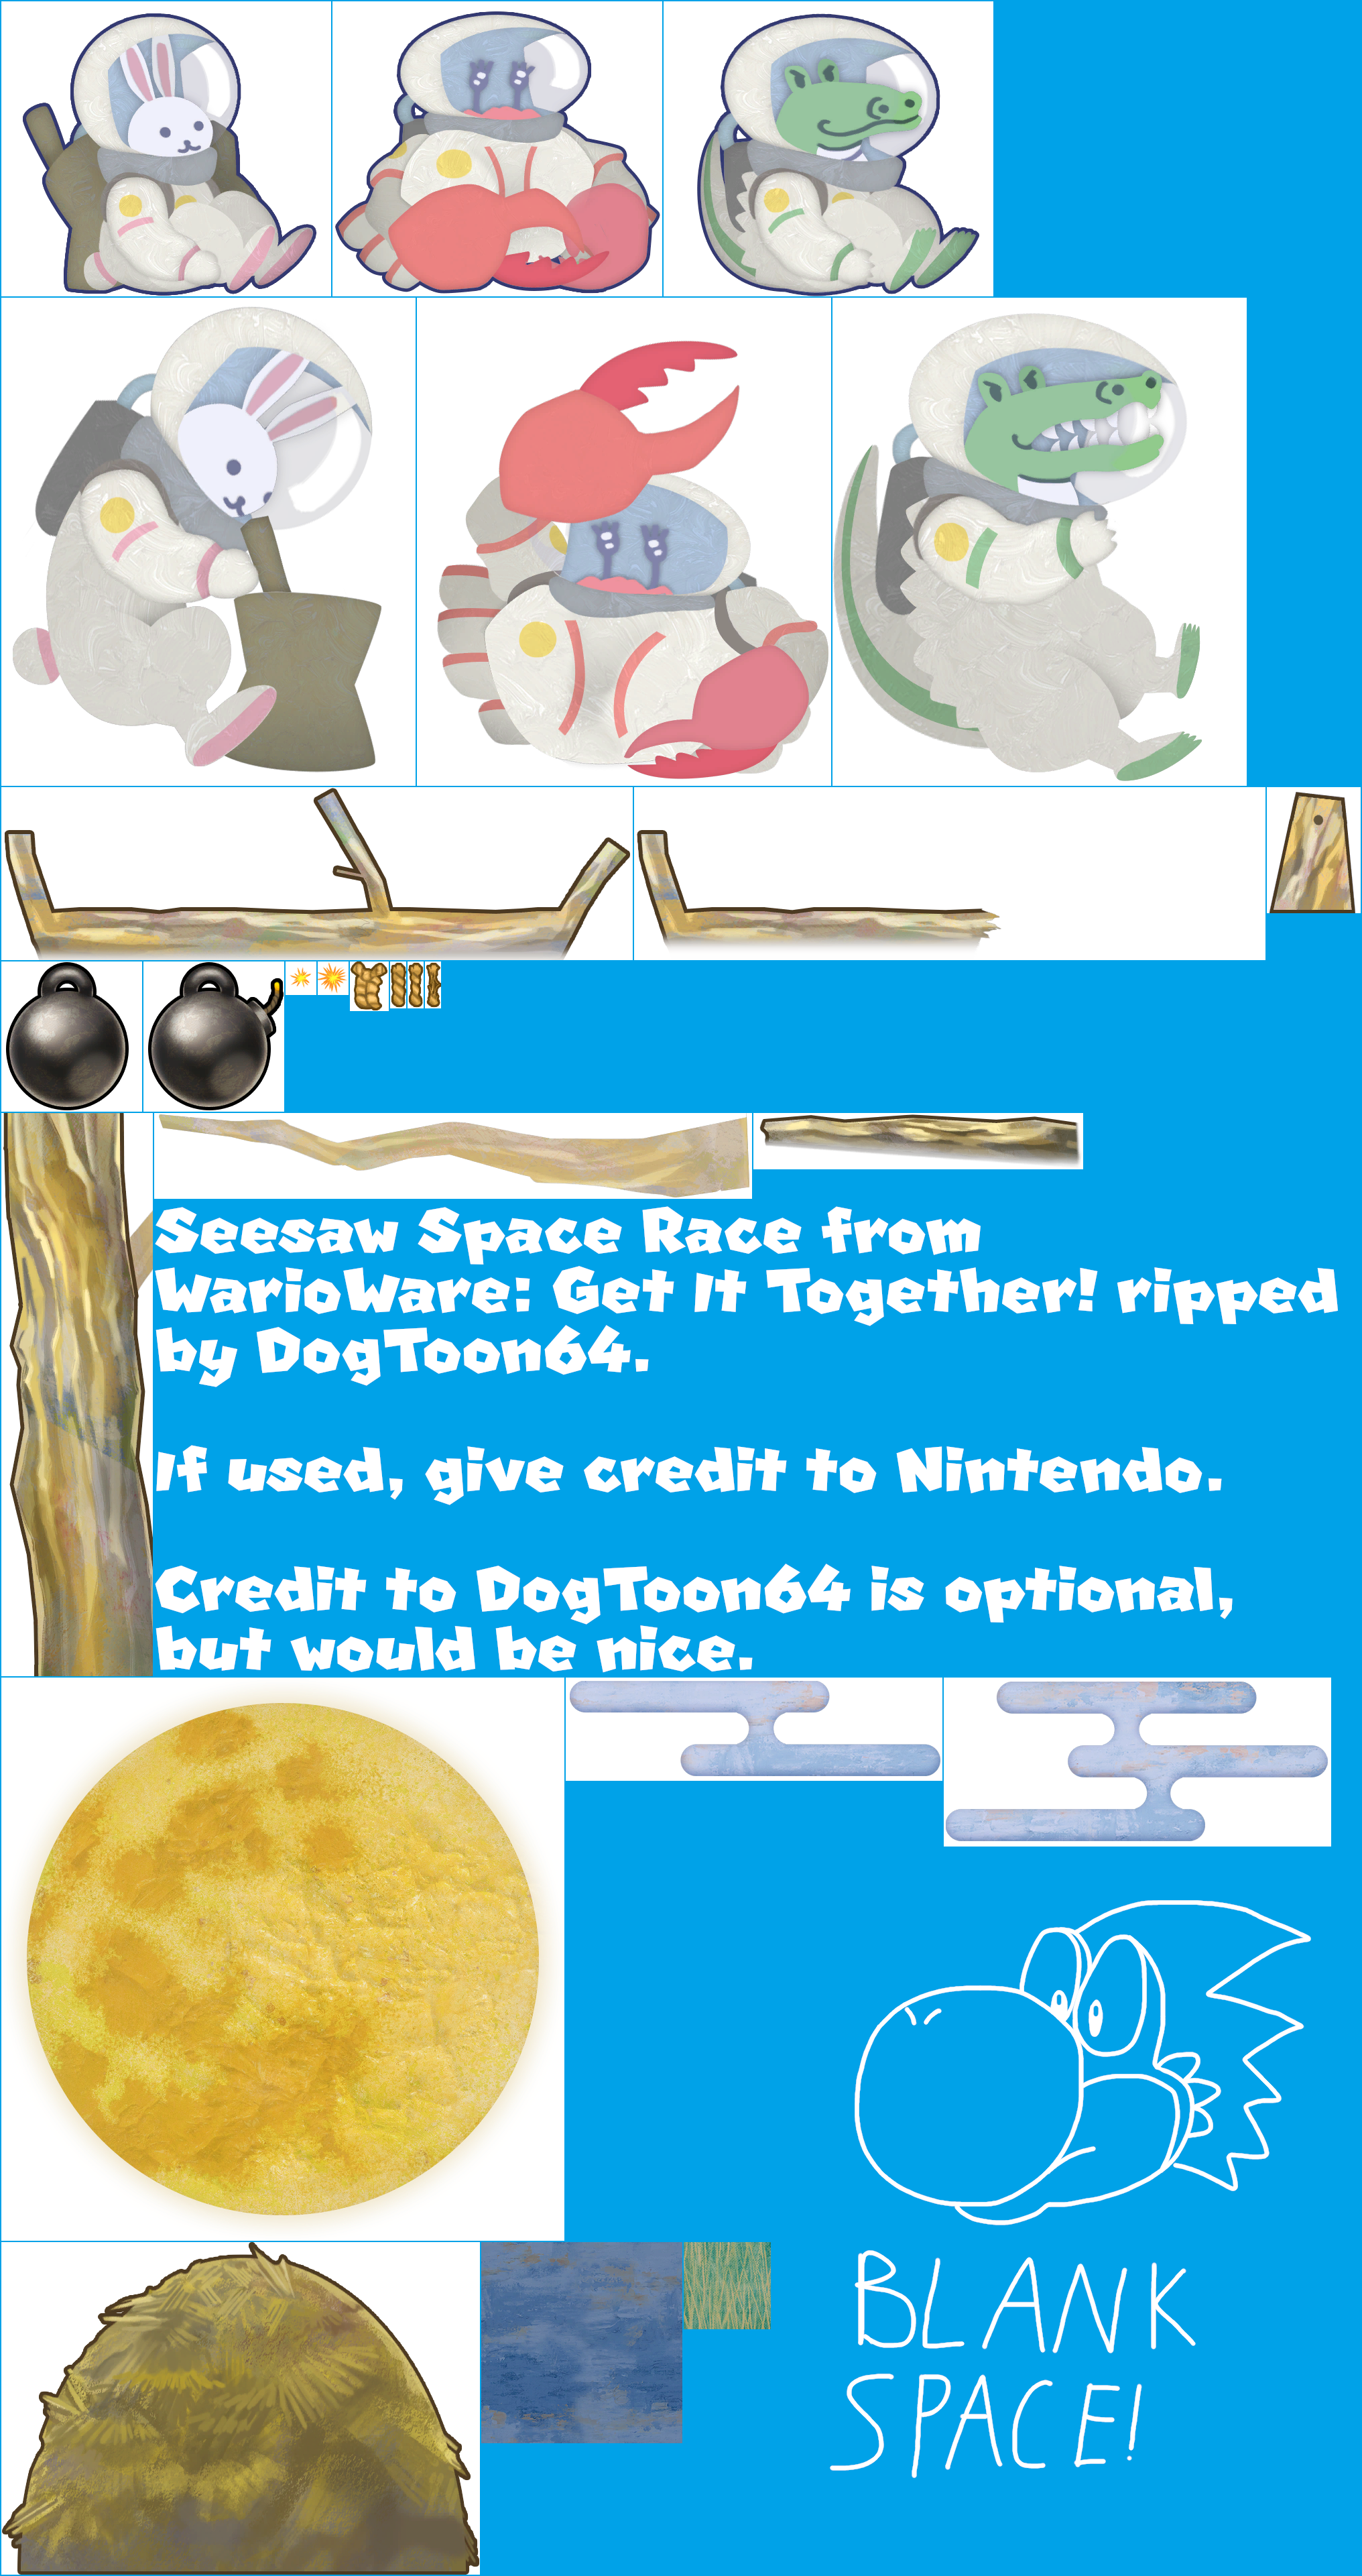 WarioWare: Get It Together! - Seesaw Space Race